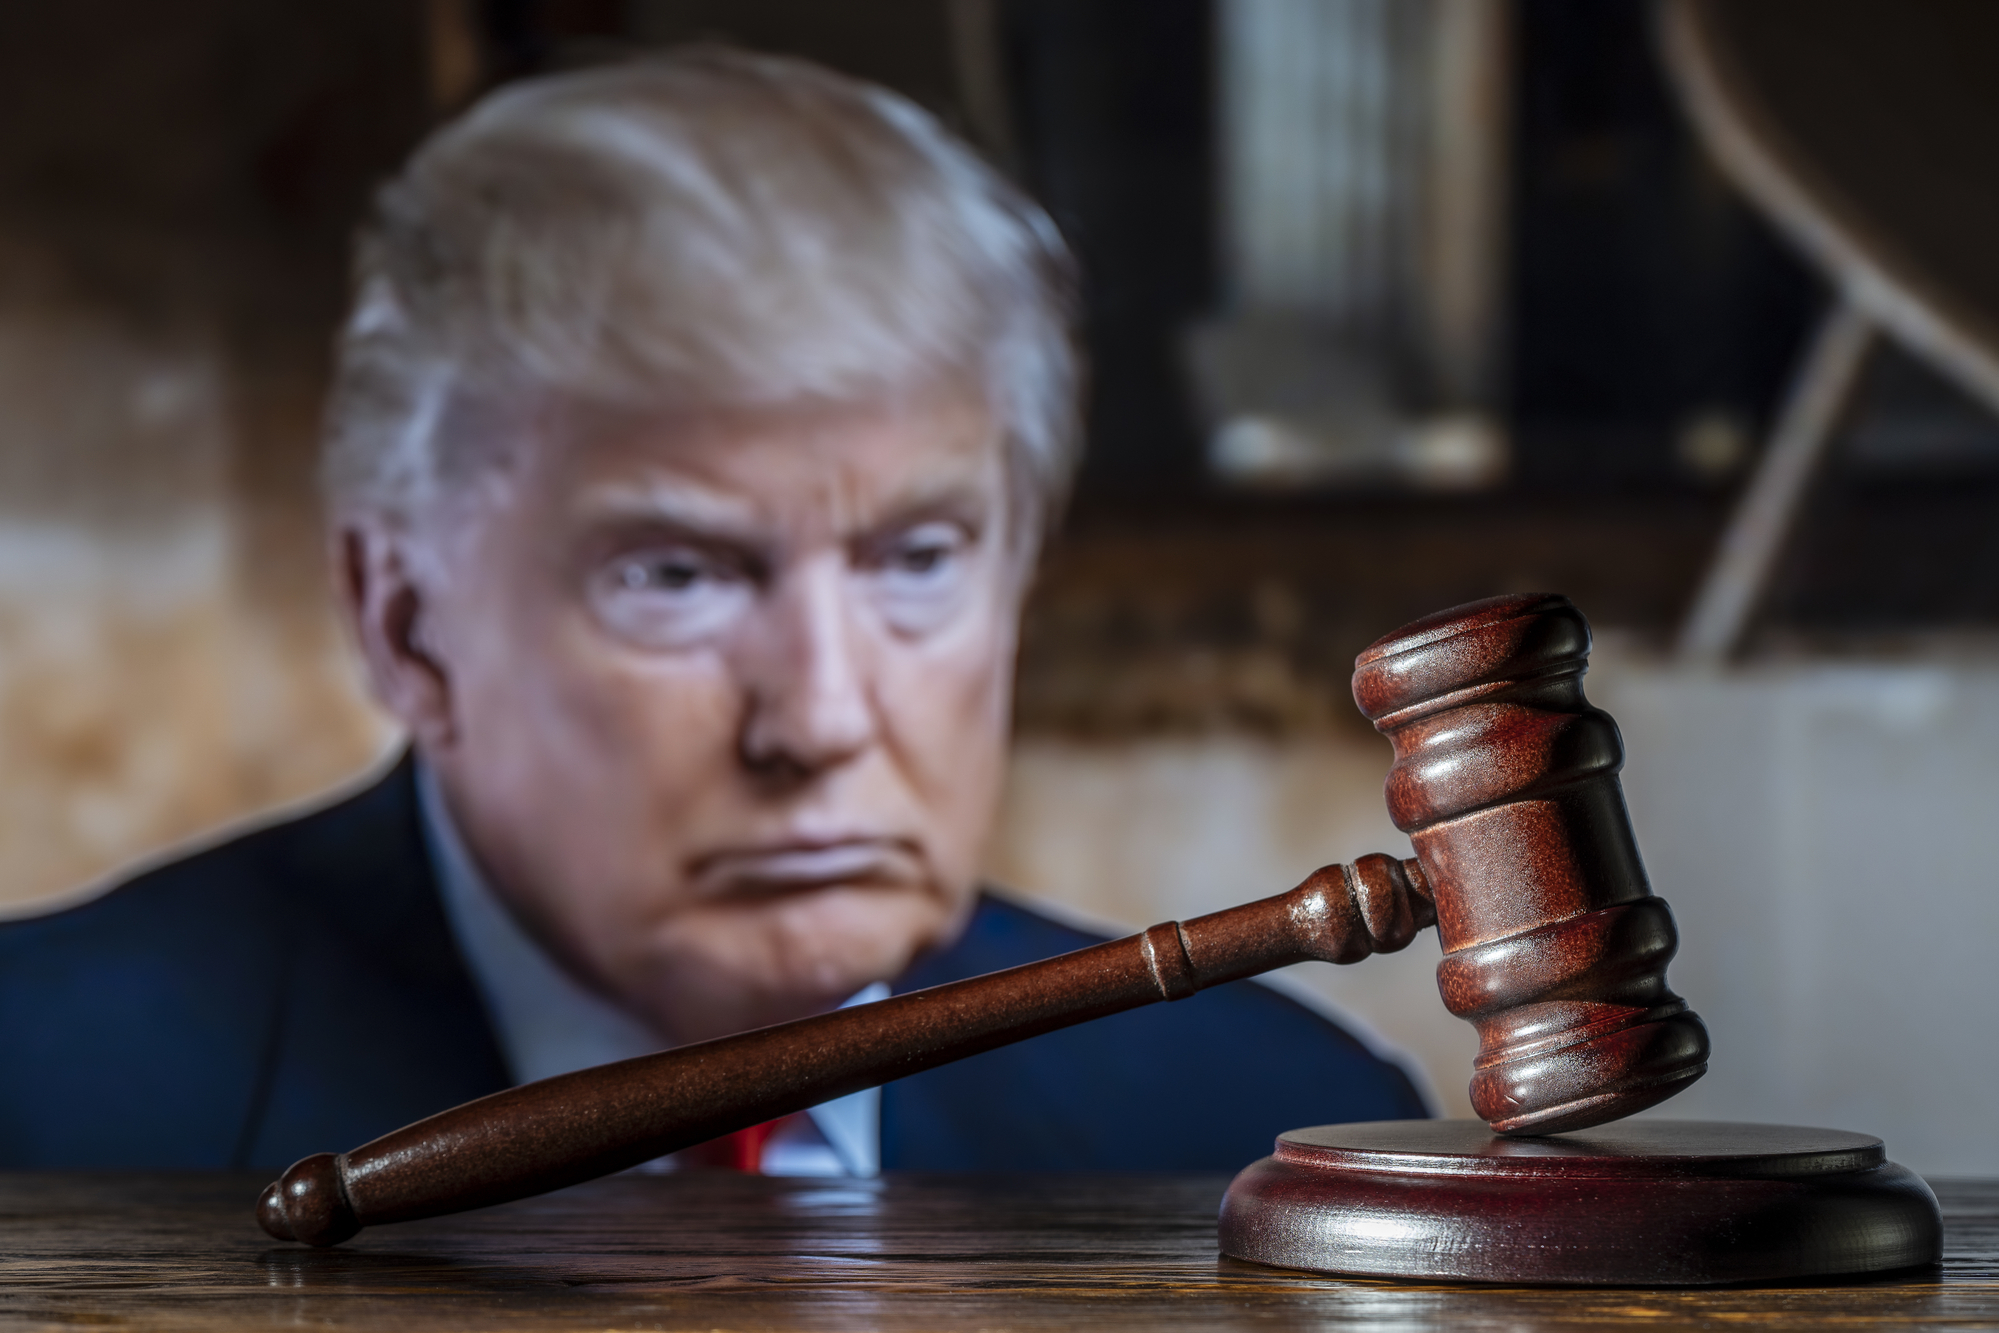 trump-interviewed-with-lawyer-present,-public-defenders-allege-‘special-treatment’